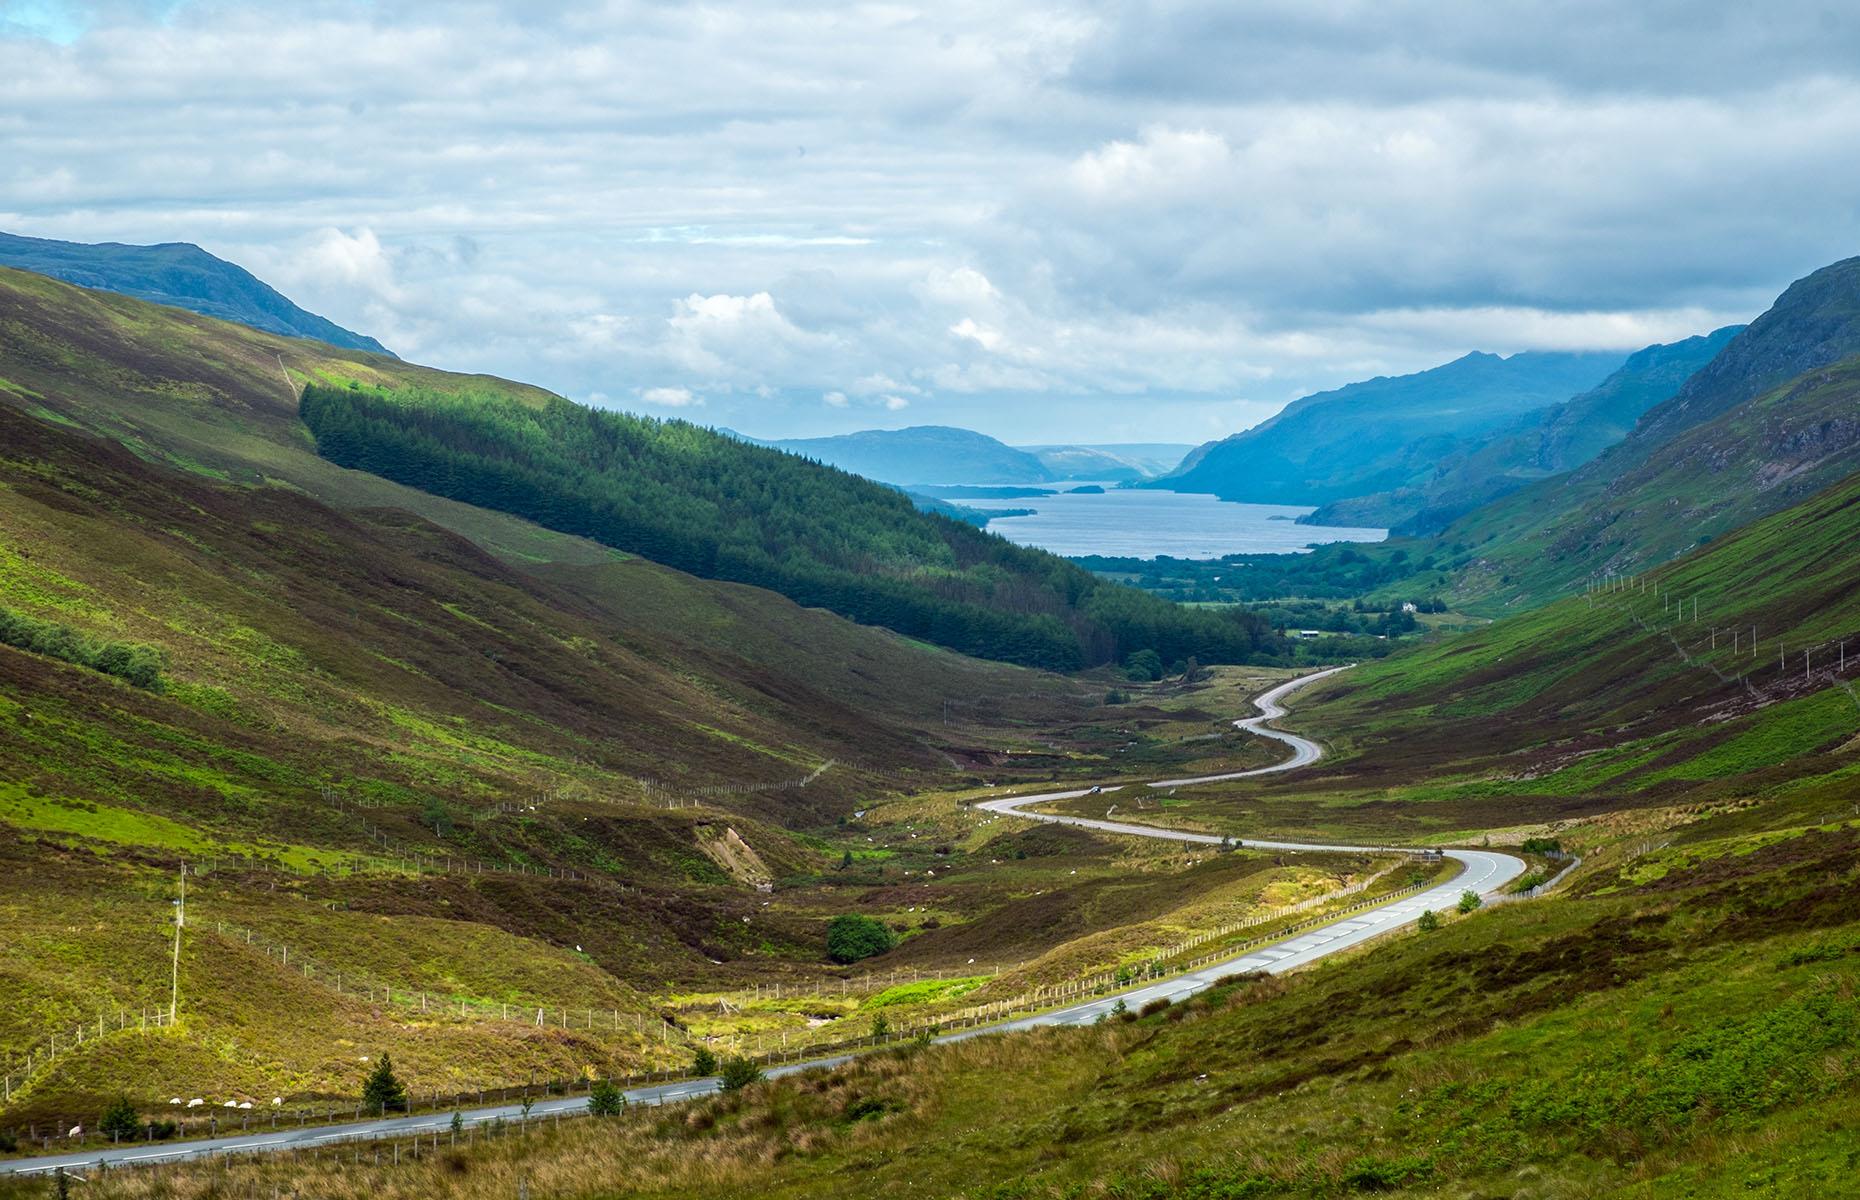 Dubbed Scotland’s answer to Route 66, the North Coast 500 traces the coast of the North Highlands, taking in vast lochs, enchanting castles, white sand beaches and dramatic cliffs. The 500-mile (805km) route starts and ends at Inverness, the capital of the Highlands.